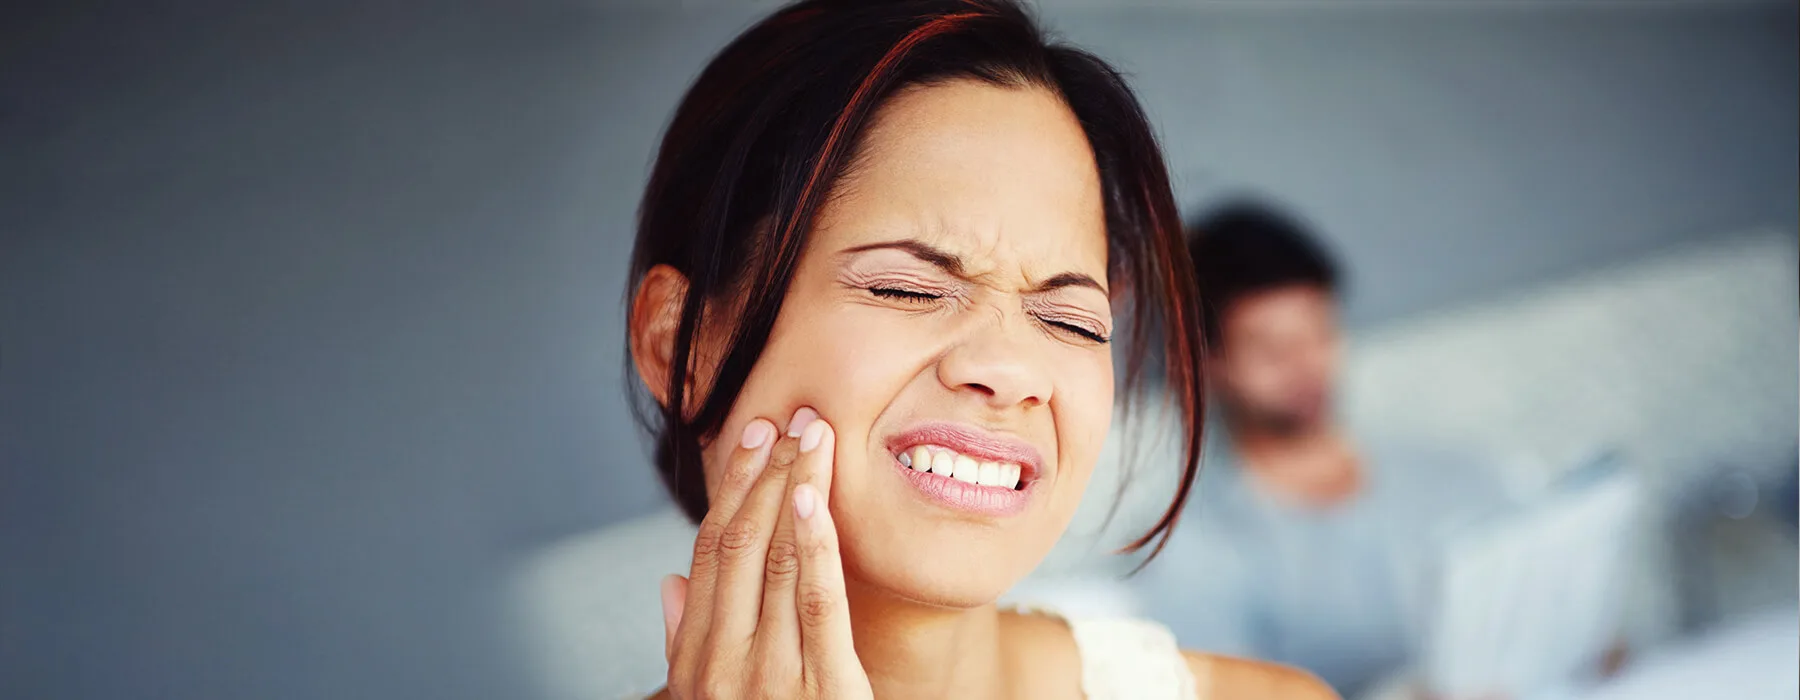 Woman with bruxism learns about teeth grinding and braces